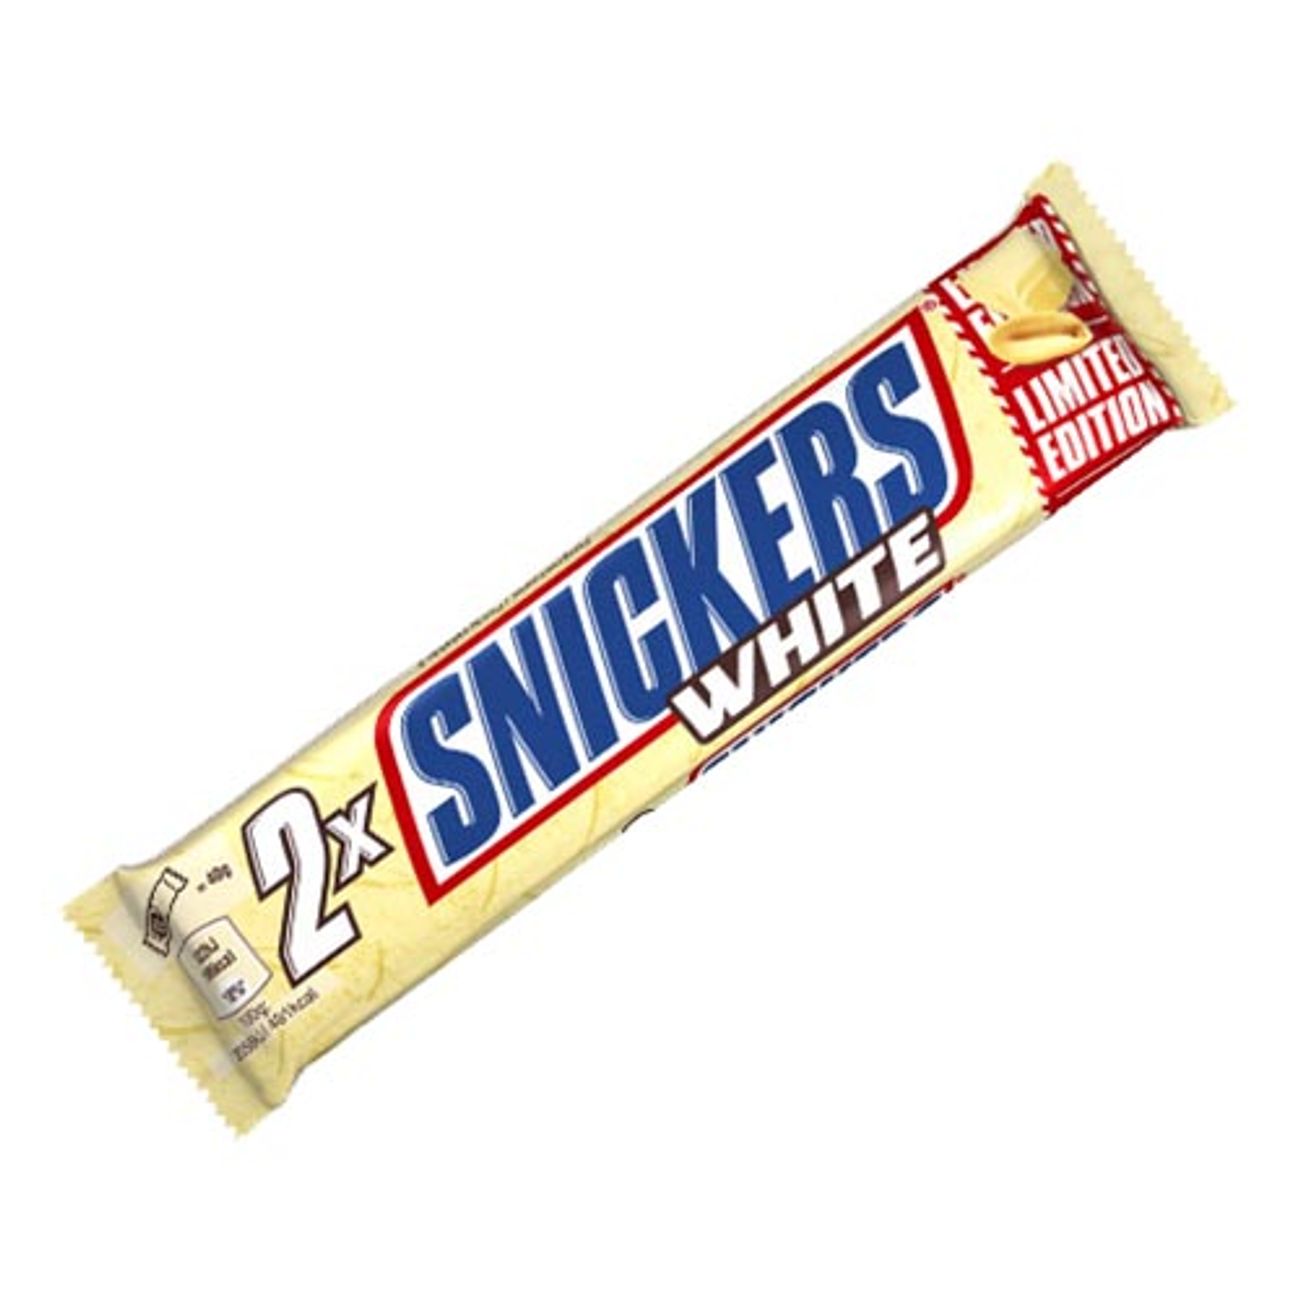 snickers-white-big-one-1